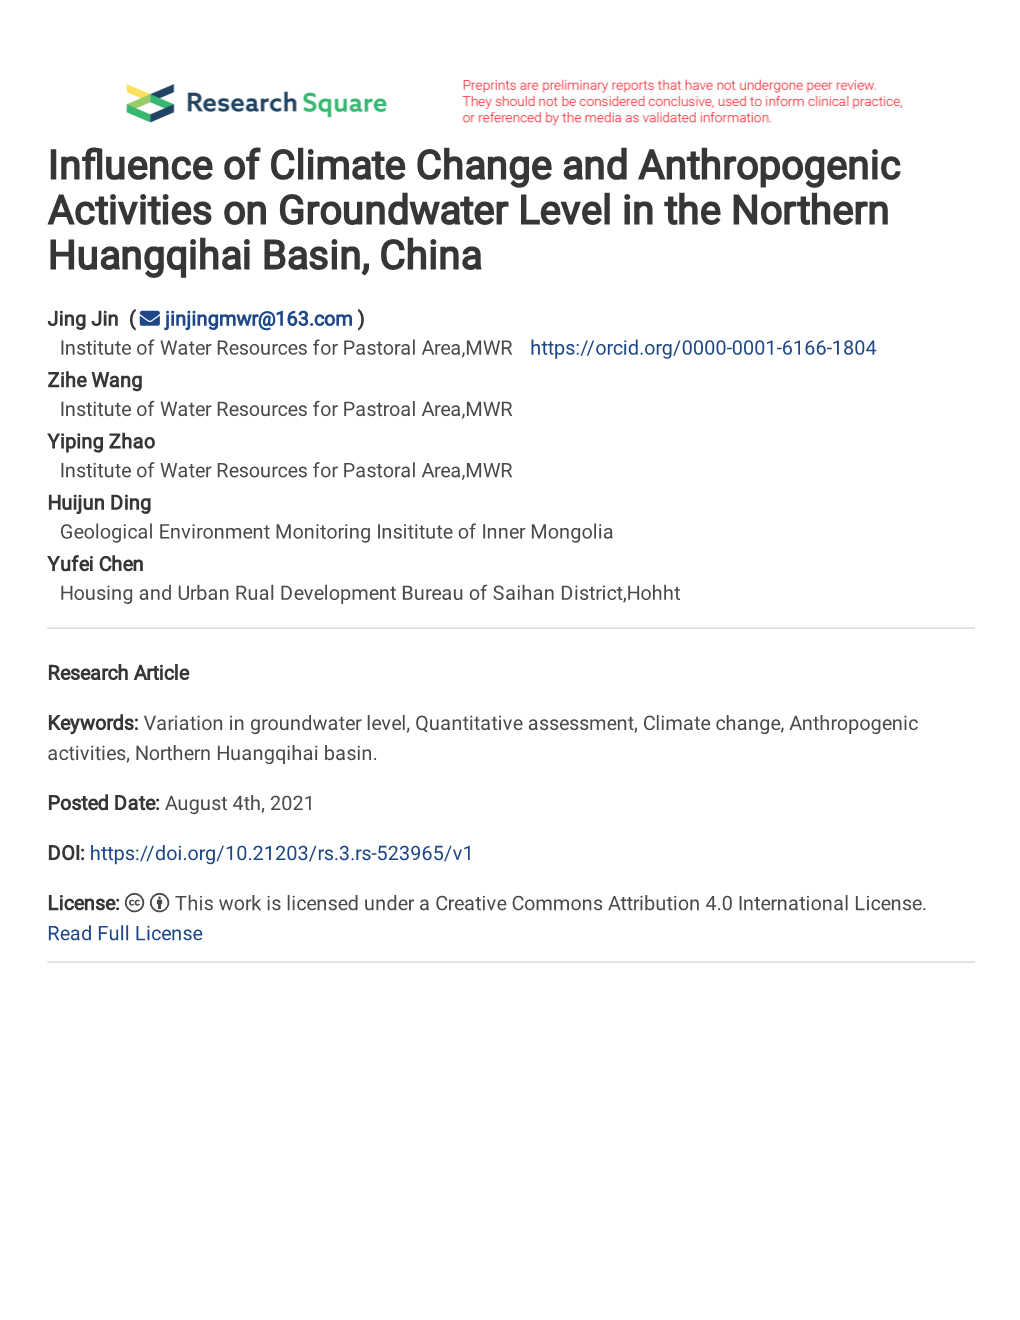 Influence of Climate Change and Anthropogenic Activities on Groundwater